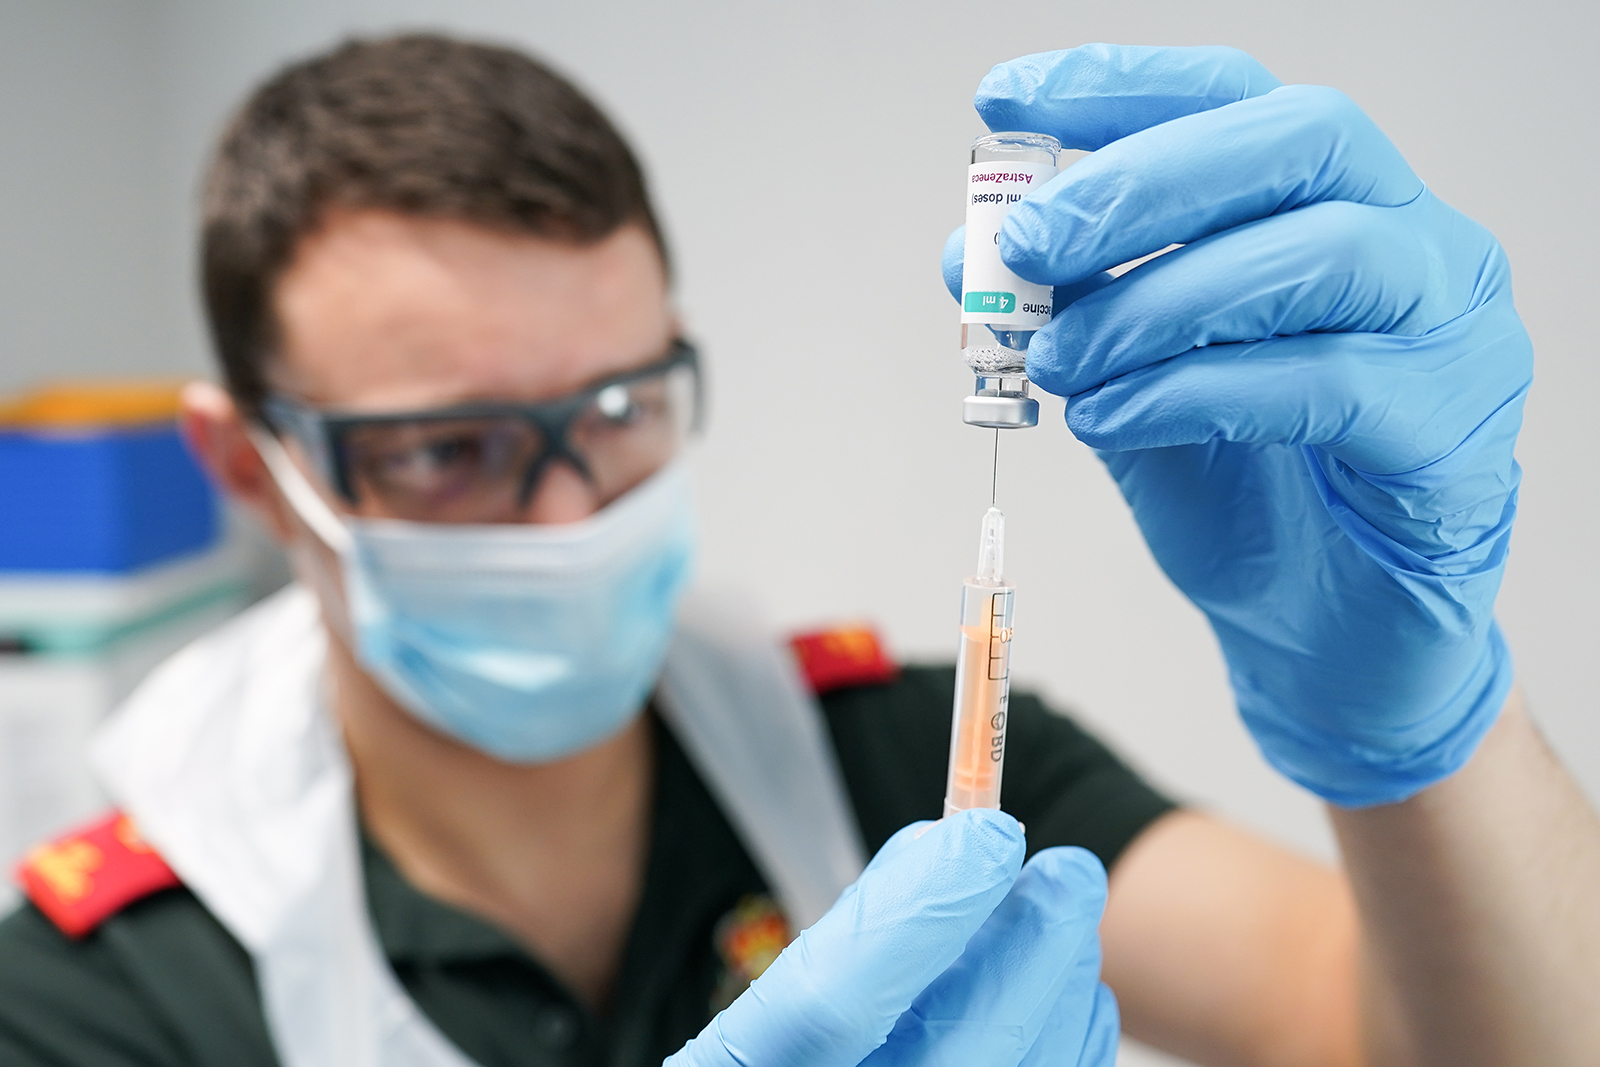 A paramedic draws up the Oxford-AstraZeneca Covid-19 vaccine at a vaccination center in Darlington, England, on March 1.